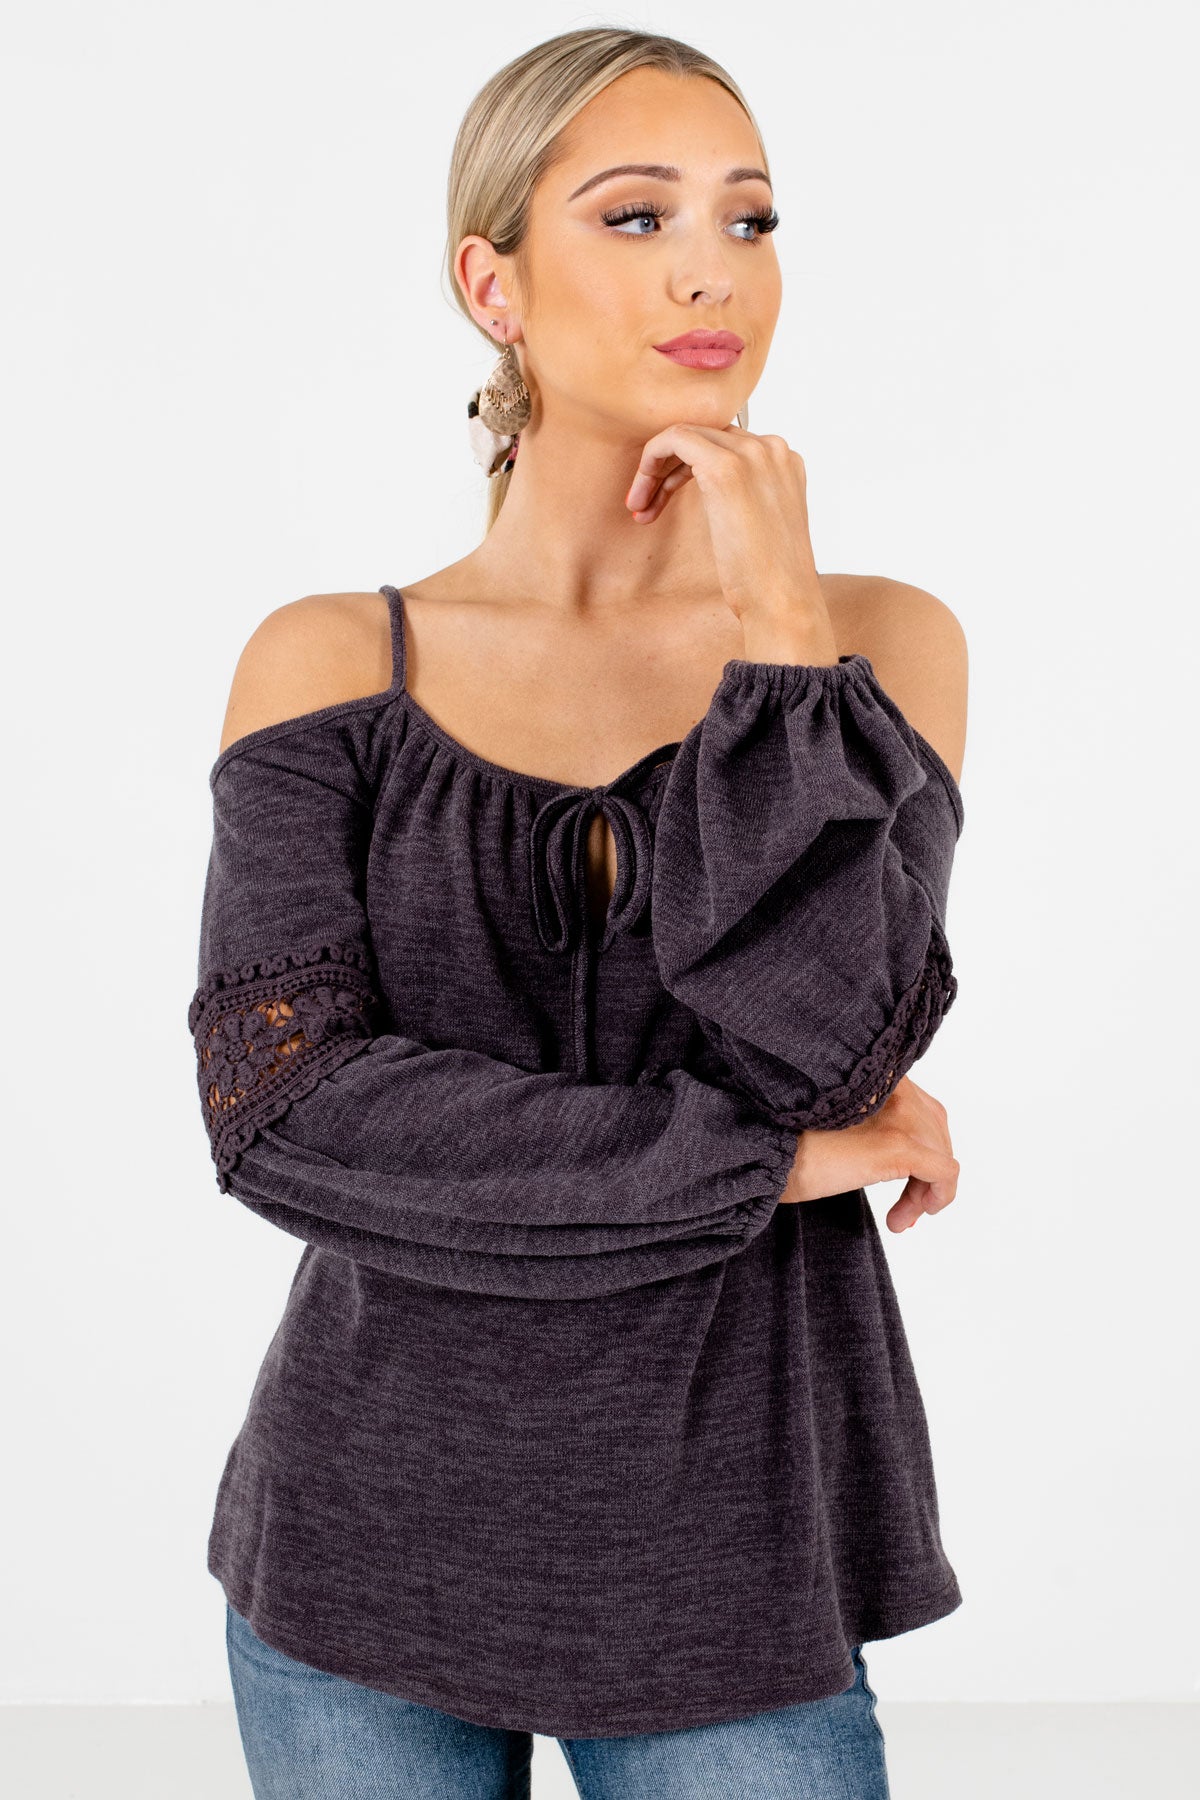 Women’s Charcoal Gray Adjustable Strap Boutique Tops